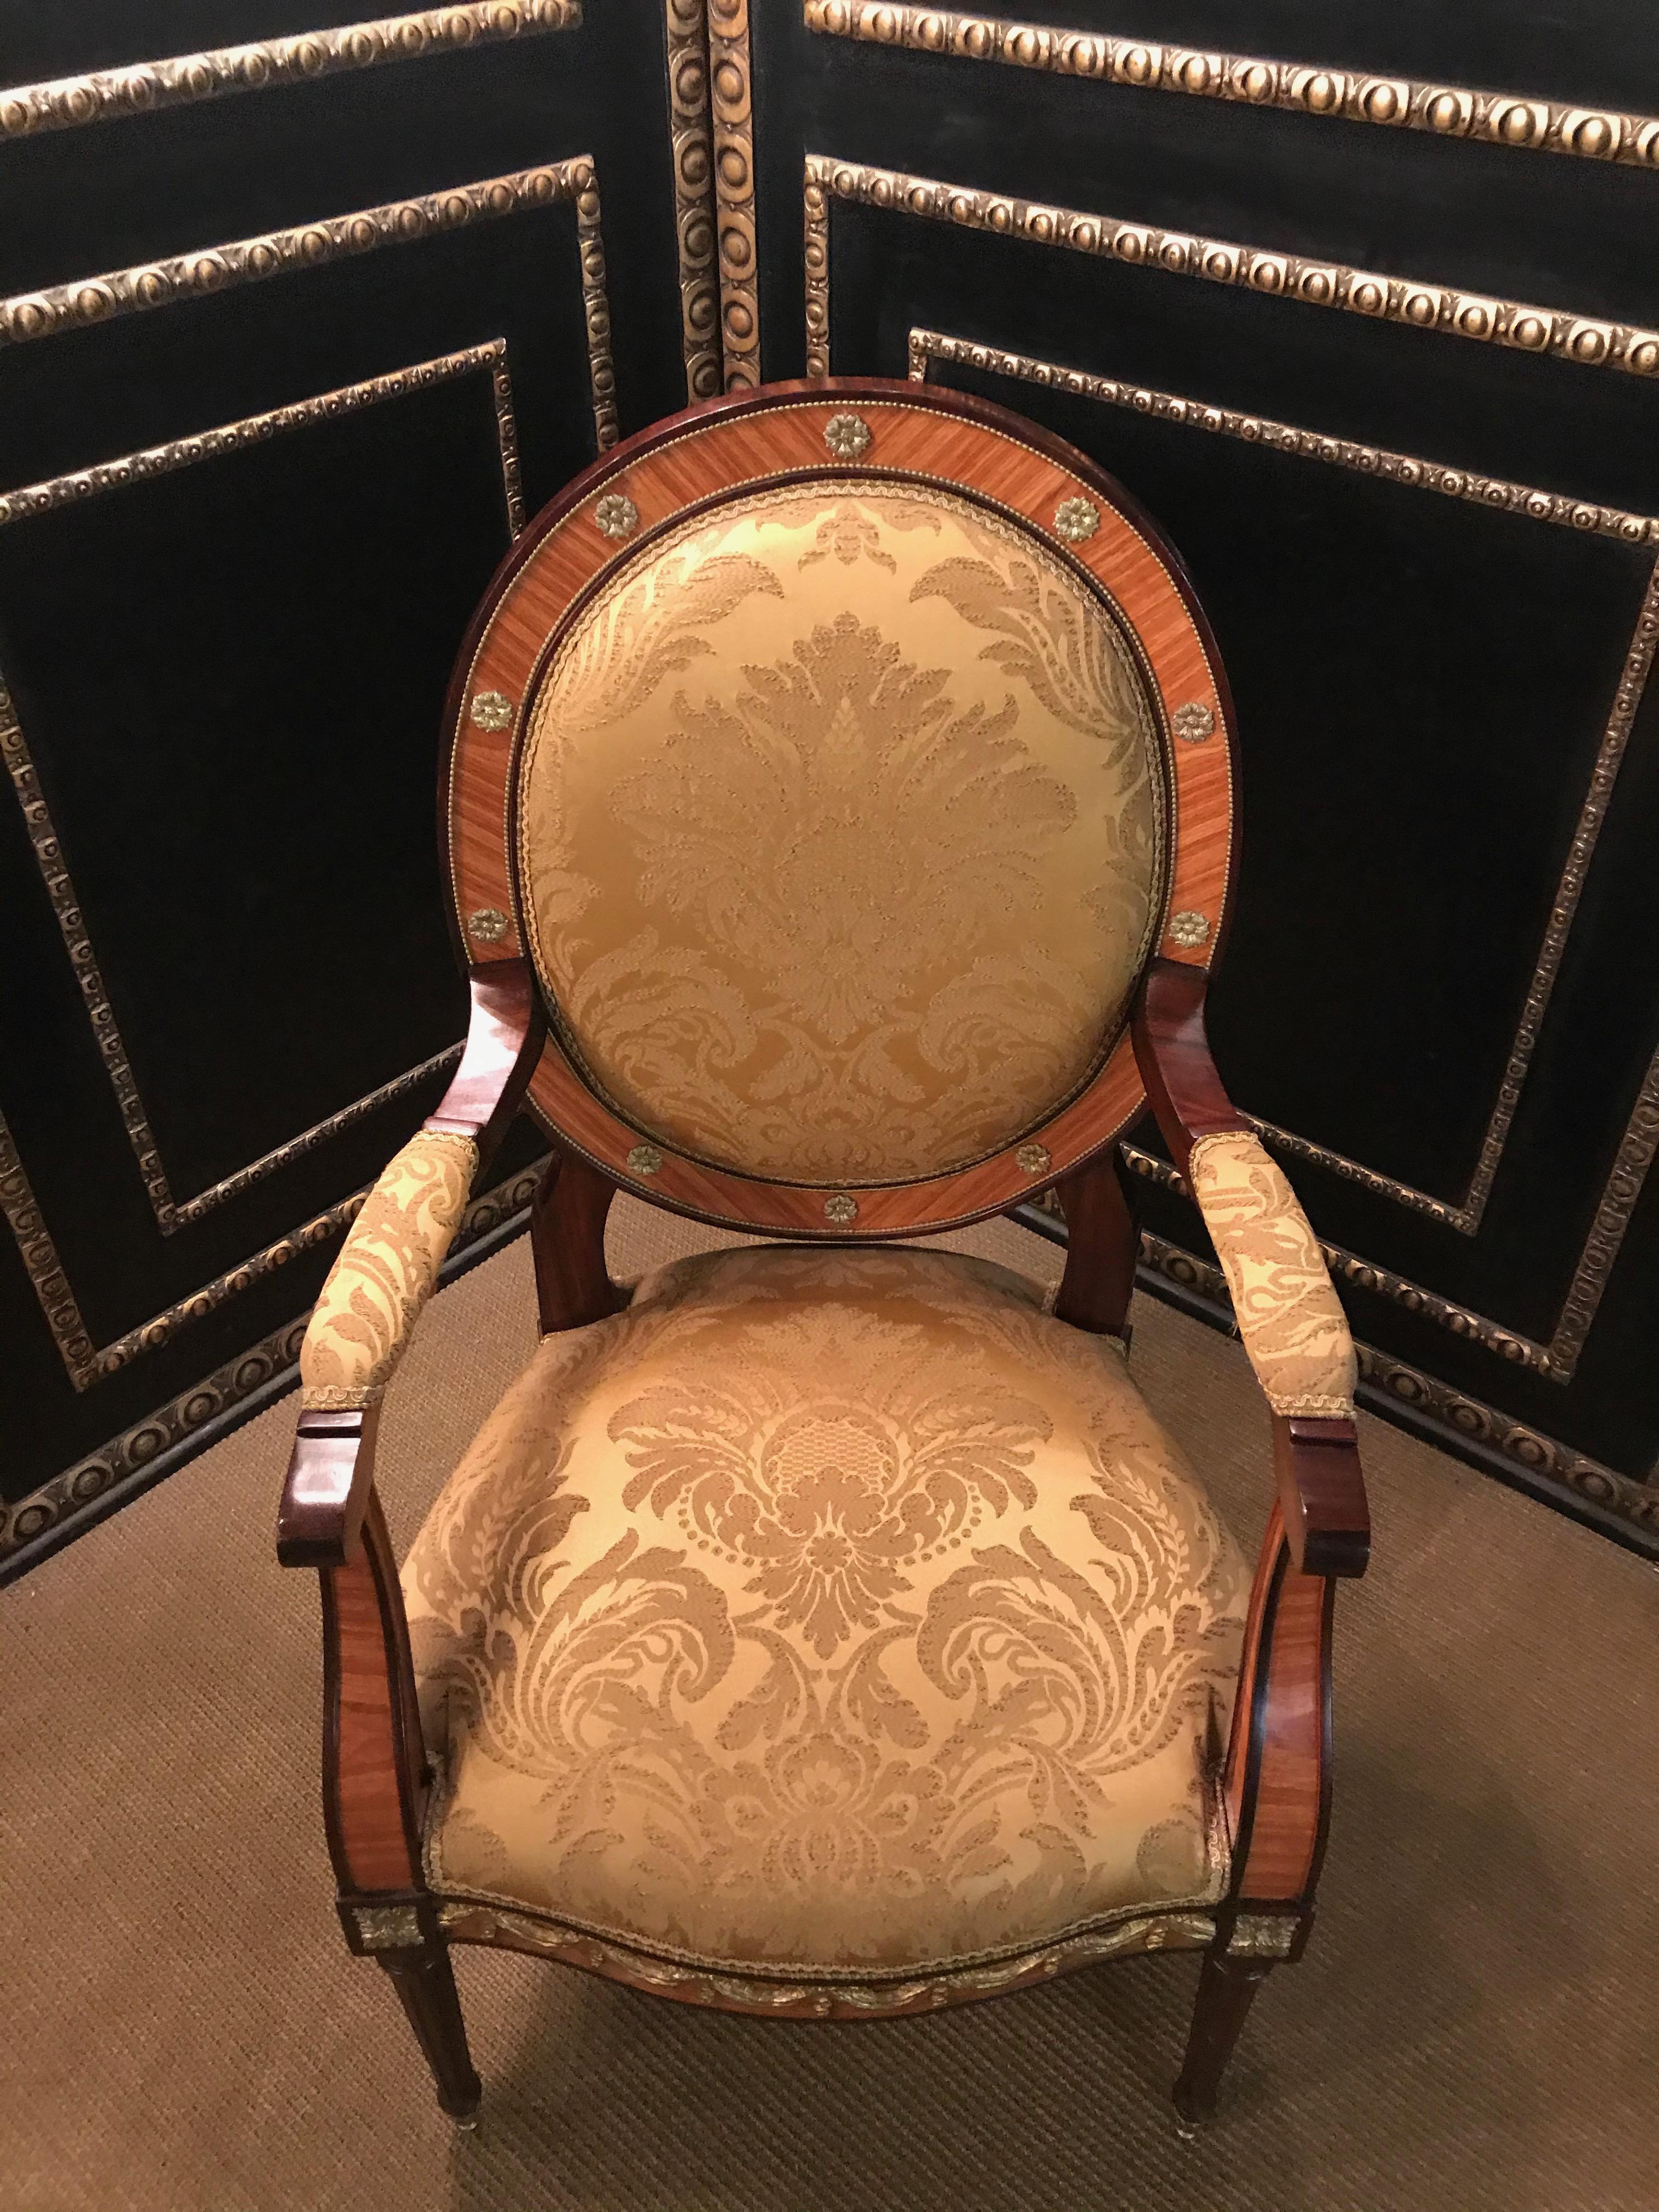 Majestic armchair in Louis Seize style

Bois-Satiné veneer, mirror veneer covering all sides on solid beech wood.

Cambered frame with richly decorated bronze in the form of fabric drapery on fluted, tapered legs ending in sabots. Curved